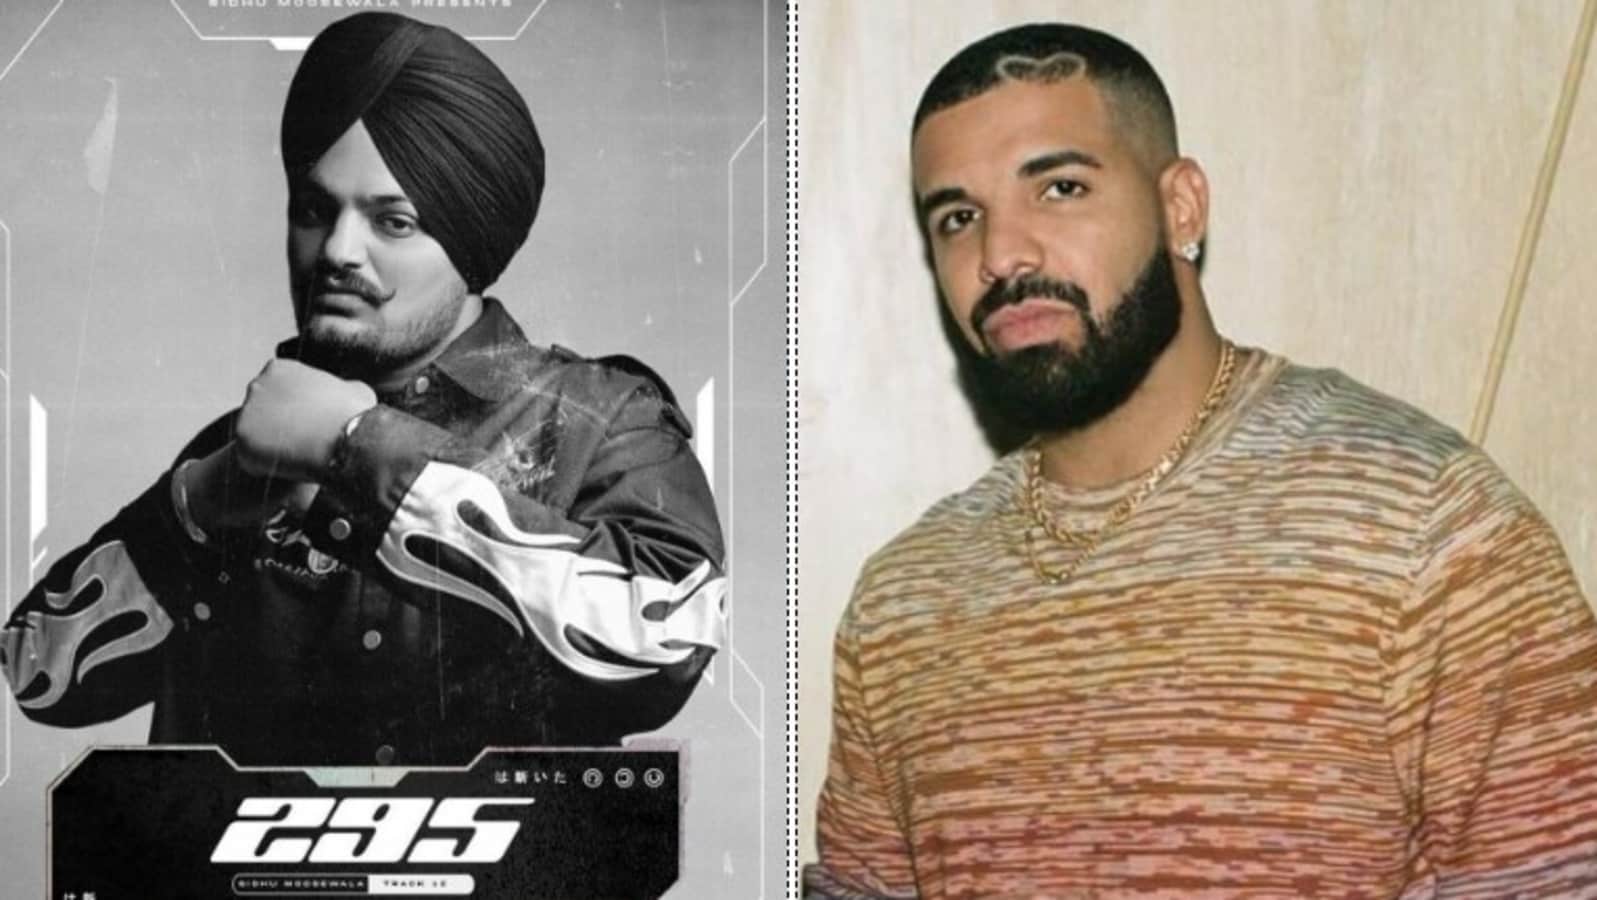 Drake pays tribute to Sidhu Moose Wala, plays his songs on new radio show